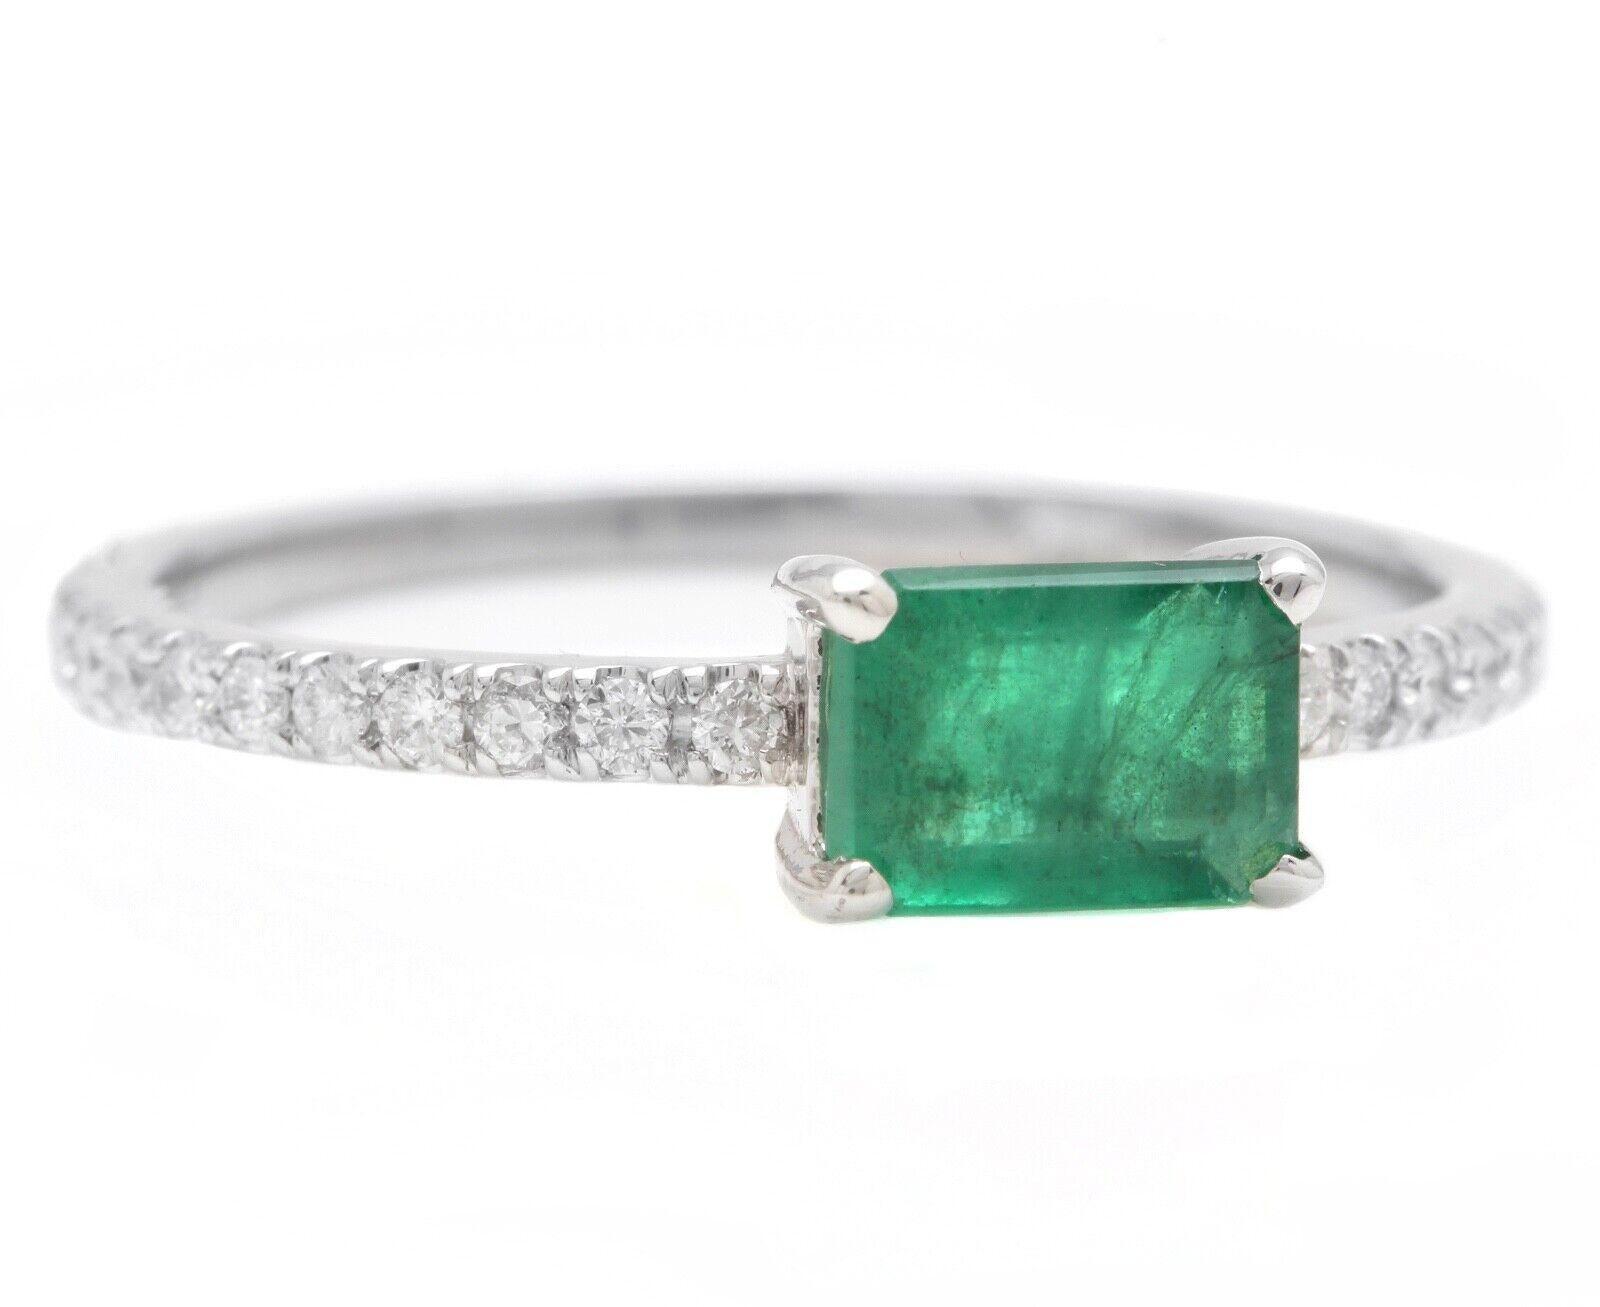 1.10 Carats Natural Emerald and Diamond 14K Solid White Gold Ring

Suggested Replacement Value: $3,500.00

Total Natural Green Emerald Weight is: Approx. 0.80 Carats (transparent)

Emerald Measures: Approx. 6.80 x 4.80mm

Natural Round Diamonds